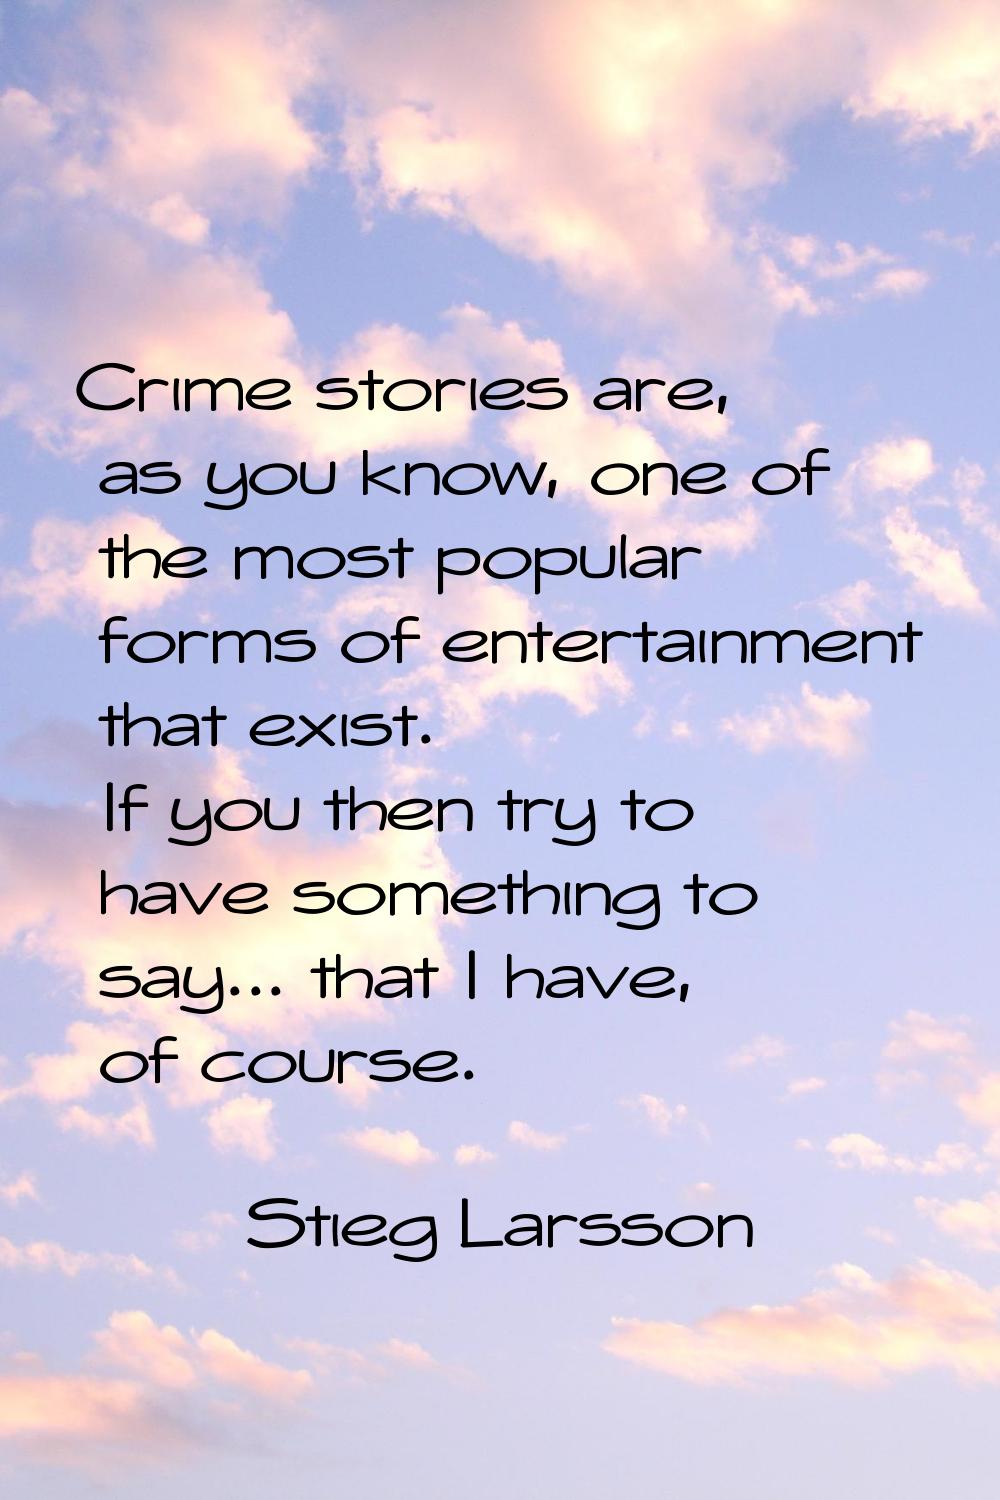 Crime stories are, as you know, one of the most popular forms of entertainment that exist. If you t